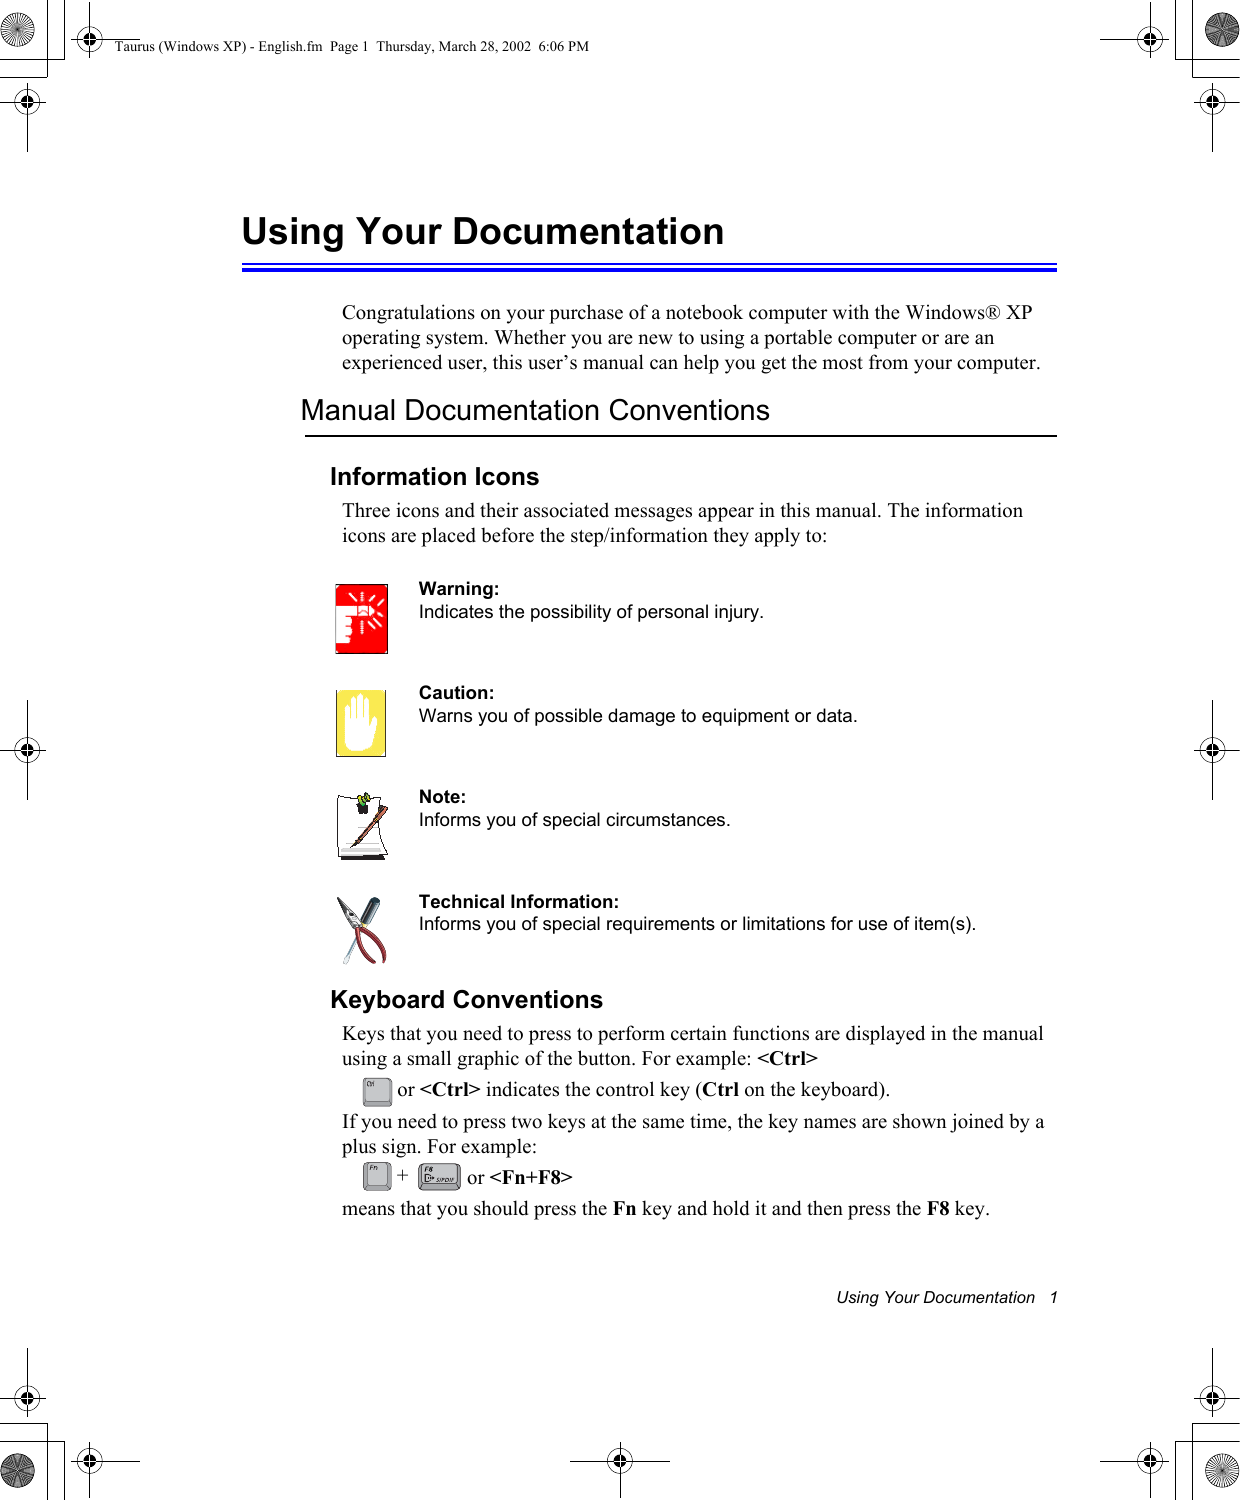 Using Your Documentation   1Using Your DocumentationCongratulations on your purchase of a notebook computer with the Windows® XP operating system. Whether you are new to using a portable computer or are an experienced user, this user’s manual can help you get the most from your computer.Manual Documentation ConventionsInformation IconsThree icons and their associated messages appear in this manual. The information icons are placed before the step/information they apply to:Warning:Indicates the possibility of personal injury.Caution:Warns you of possible damage to equipment or data.Note:Informs you of special circumstances.Technical Information:Informs you of special requirements or limitations for use of item(s).Keyboard ConventionsKeys that you need to press to perform certain functions are displayed in the manual using a small graphic of the button. For example: &lt;Ctrl&gt; or &lt;Ctrl&gt; indicates the control key (Ctrl on the keyboard). If you need to press two keys at the same time, the key names are shown joined by a plus sign. For example: or &lt;Fn+F8&gt;means that you should press the Fn key and hold it and then press the F8 key.+Taurus (Windows XP) - English.fm  Page 1  Thursday, March 28, 2002  6:06 PM